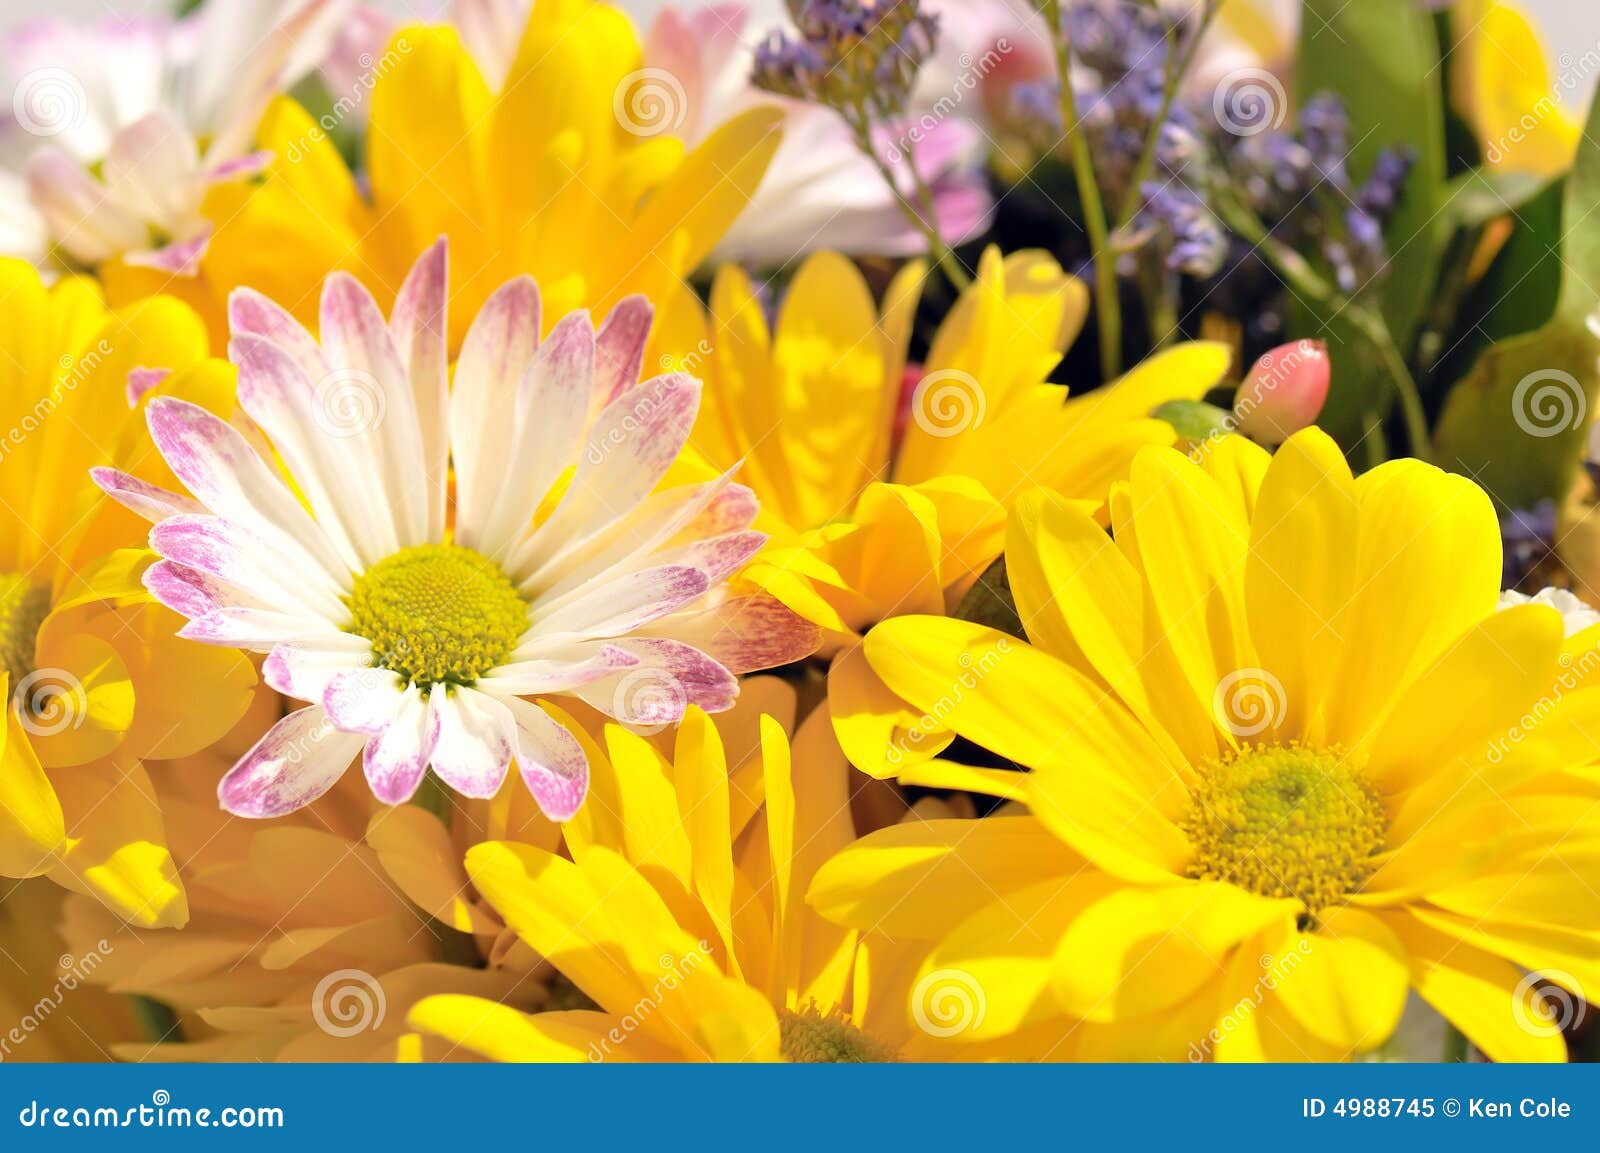 bright cheerful spring flowers